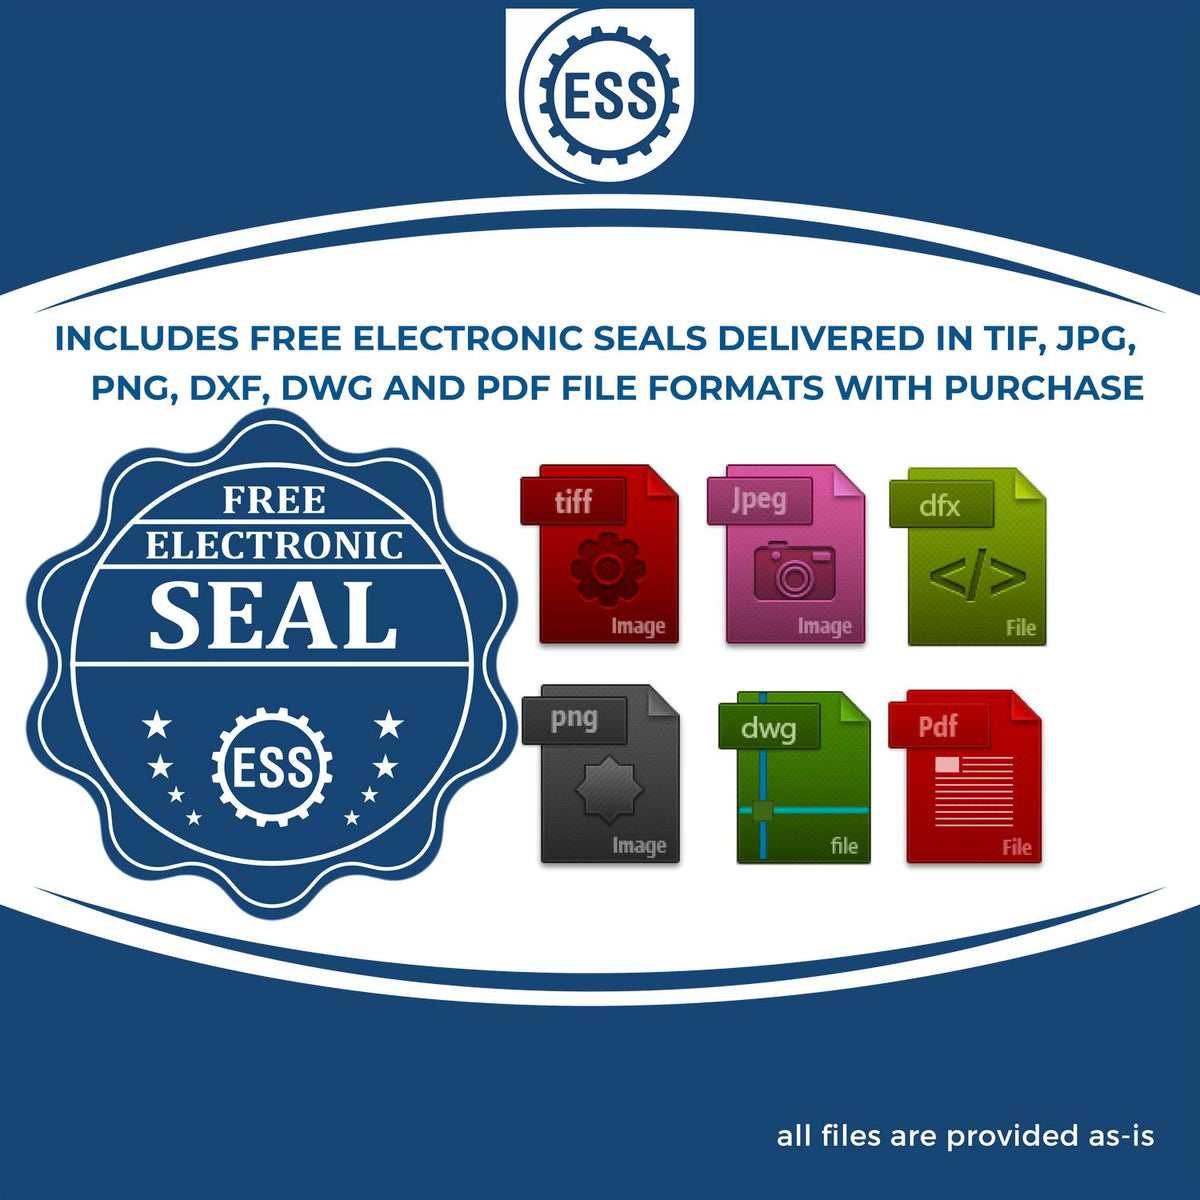 An infographic for the free electronic seal for the Hybrid Michigan Geologist Seal illustrating the different file type icons such as DXF, DWG, TIF, JPG and PNG.